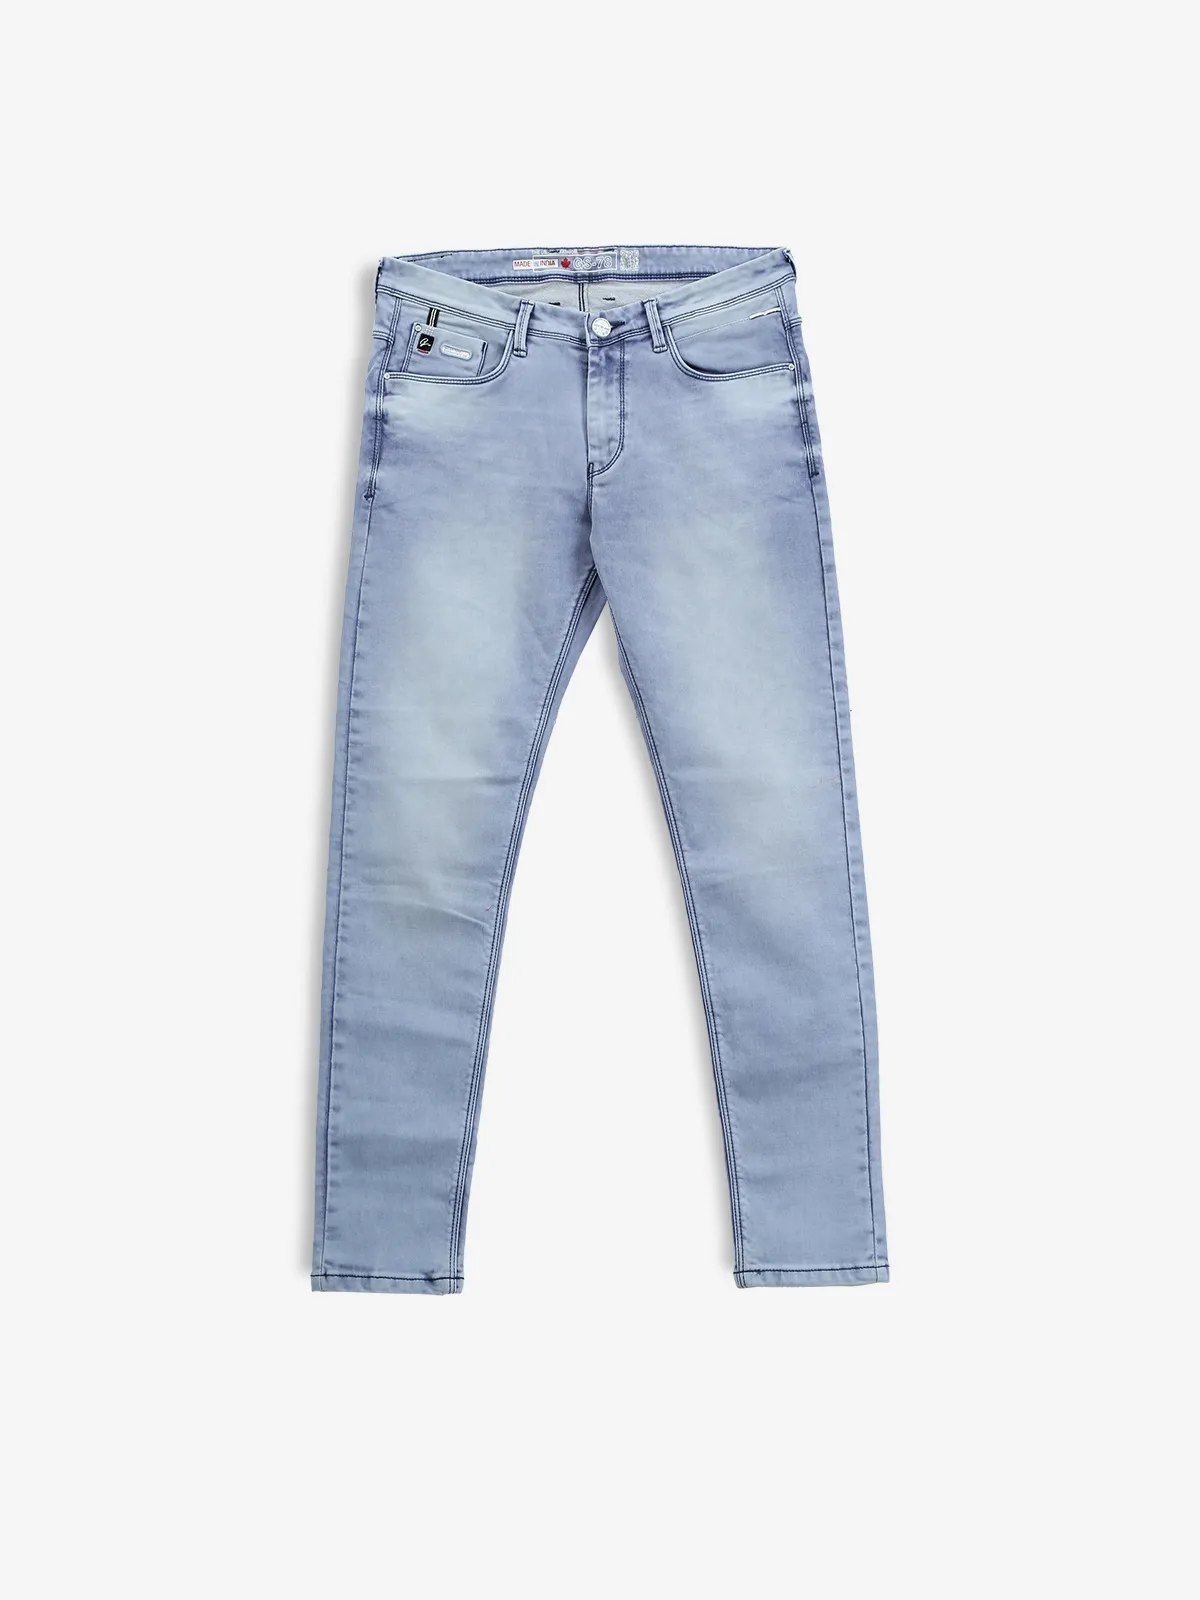 GS78 washed light blue jeans